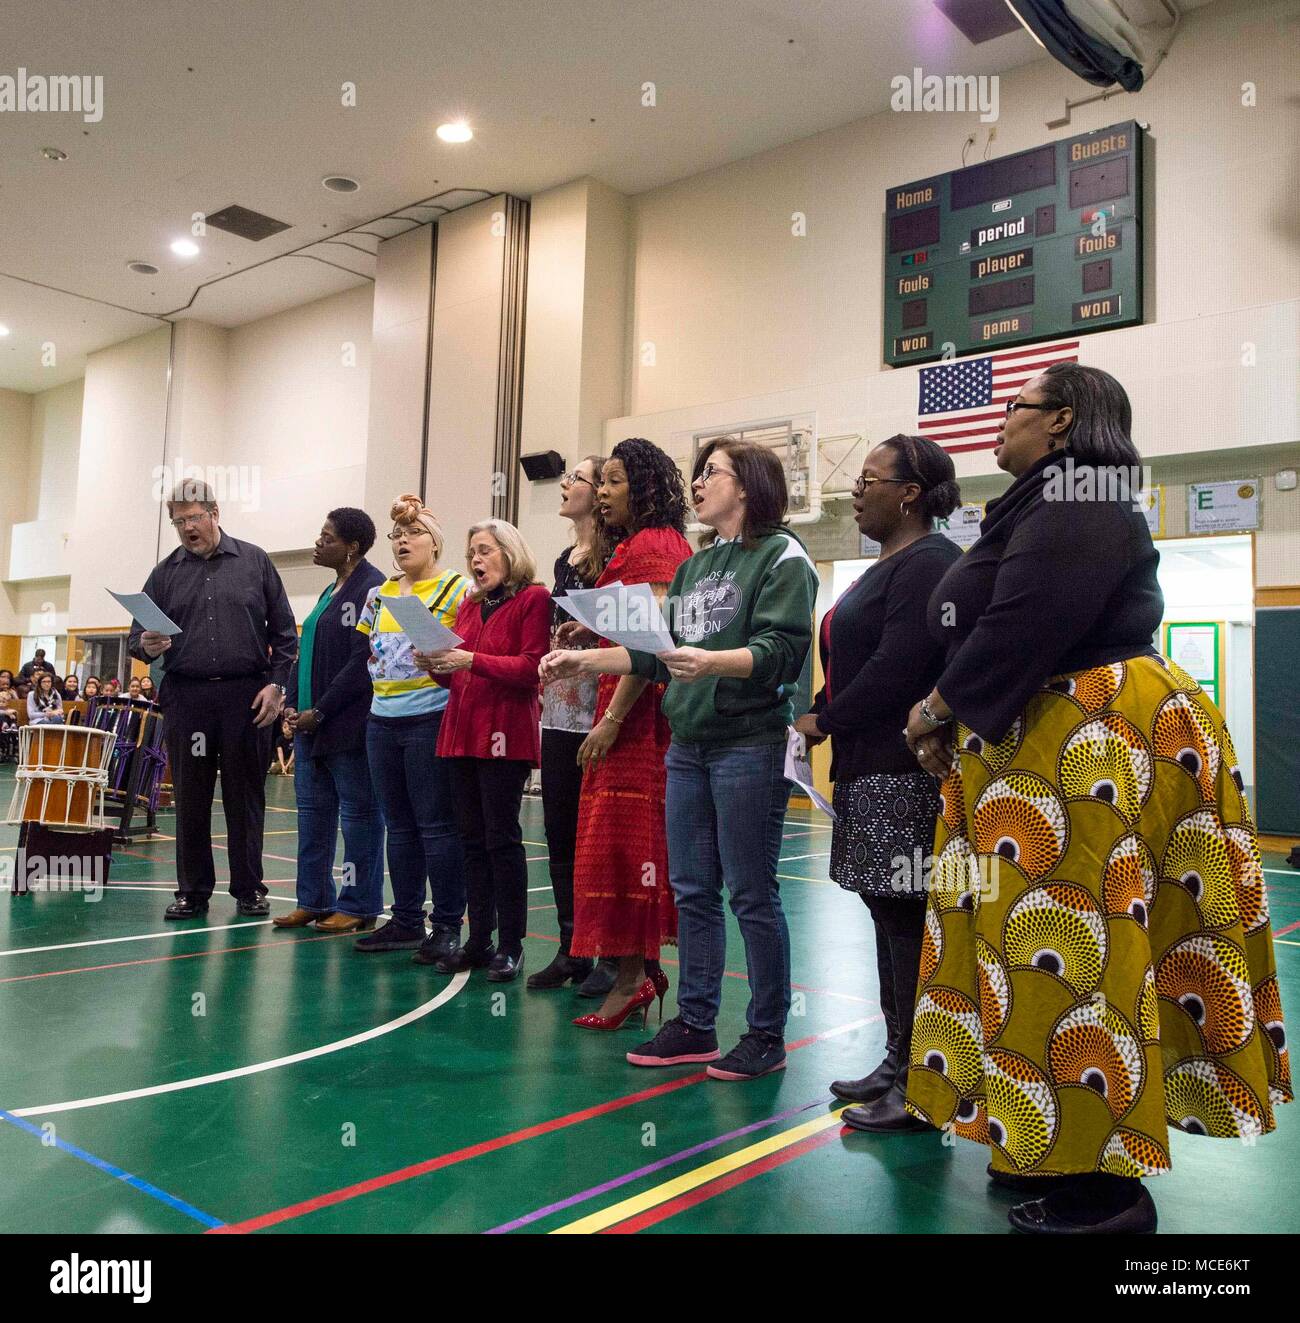 180223-N-LG762-078 YOKOSUKA, Japan (Feb. 23, 2018) Yokosuka Middle School Faculty sings The Black National Anthem during a Multicultural Night, Feb. 23.  The school's National Junior Honor Society (NJHS) hosted the unity-themed event which featured several performances from community members, local schools, and various performance groups. The student-led evening highlighted Dr. Martin Luther King's message of equality while celebrating Black History Month. (U.S. Navy photo by Mass Communication Specialist 2nd Class Zhiwei Tan/Released) Stock Photo